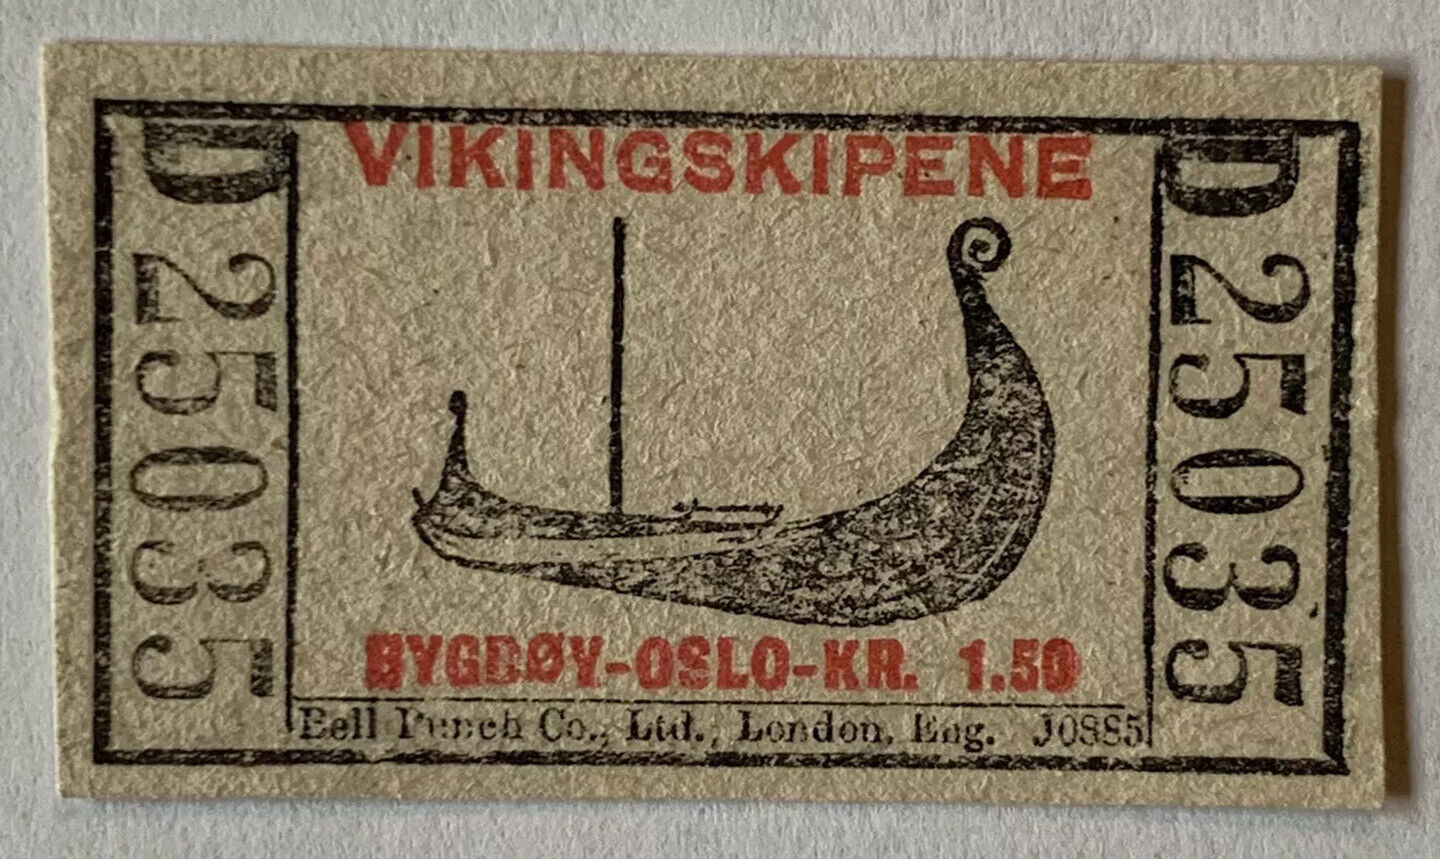 RARE OSLO NORWAY VIKING SHIP MUSEUM TICKET, BELL PUNCH